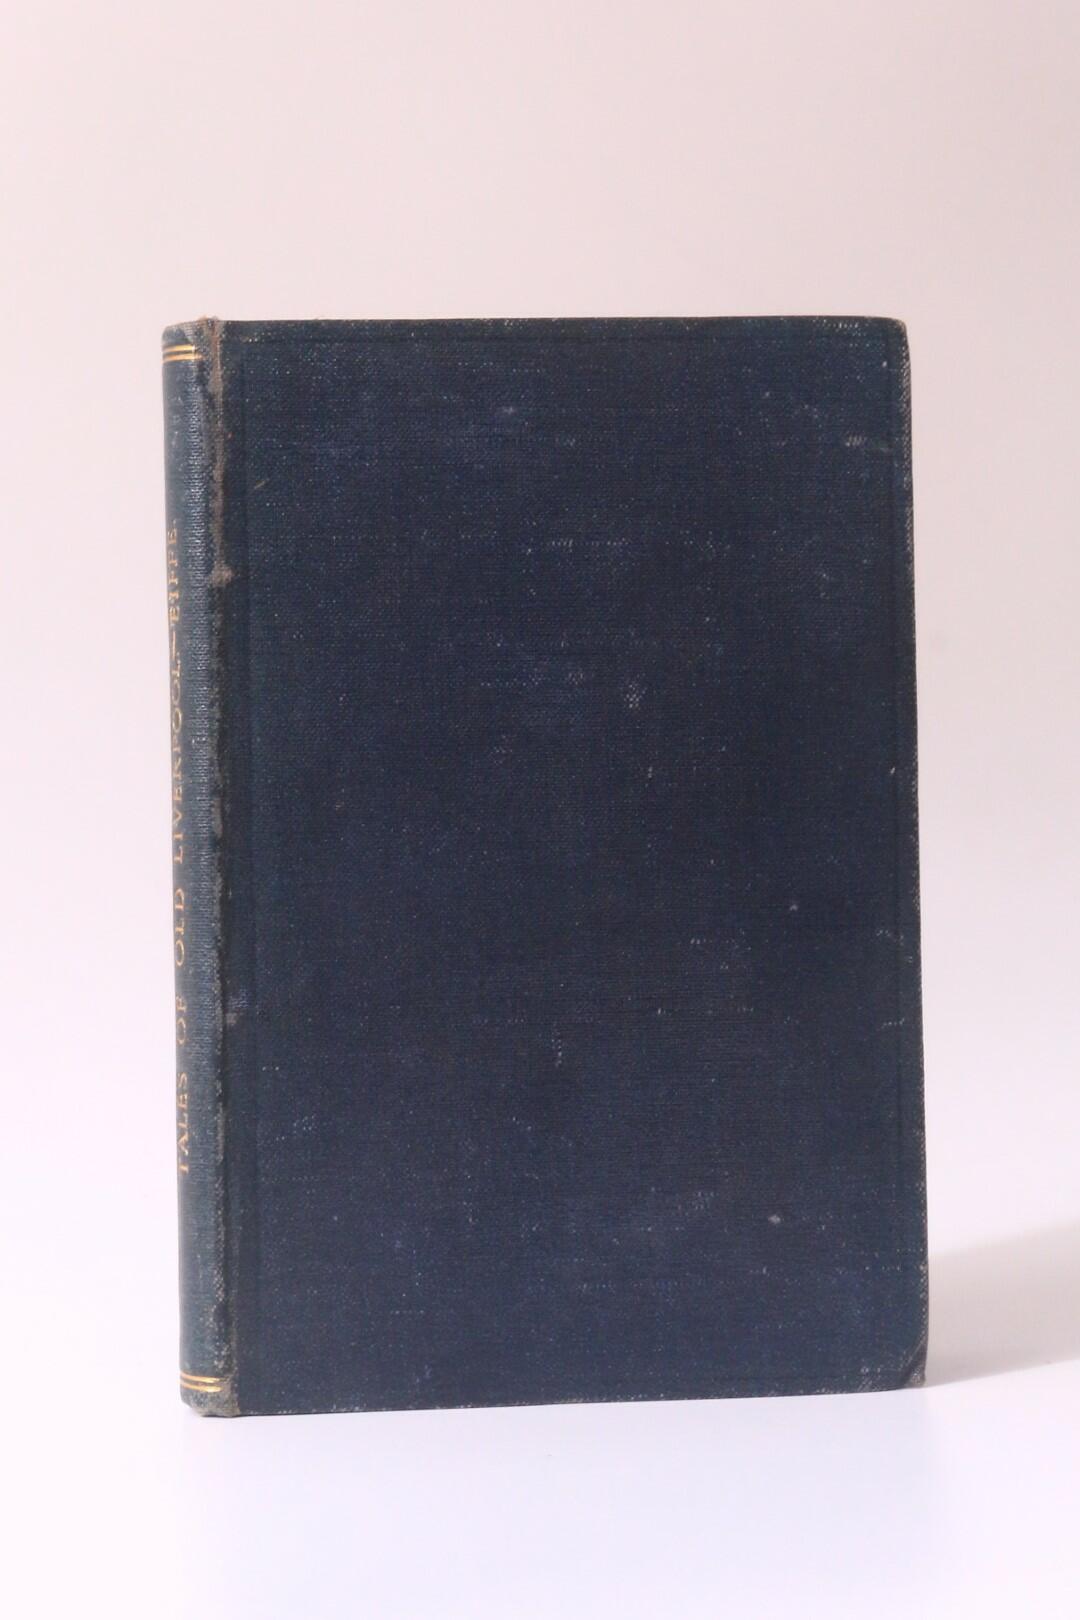 John P. Eiffe - Tales of Old Liverpool - Mackie & Co., 1886, First Edition.